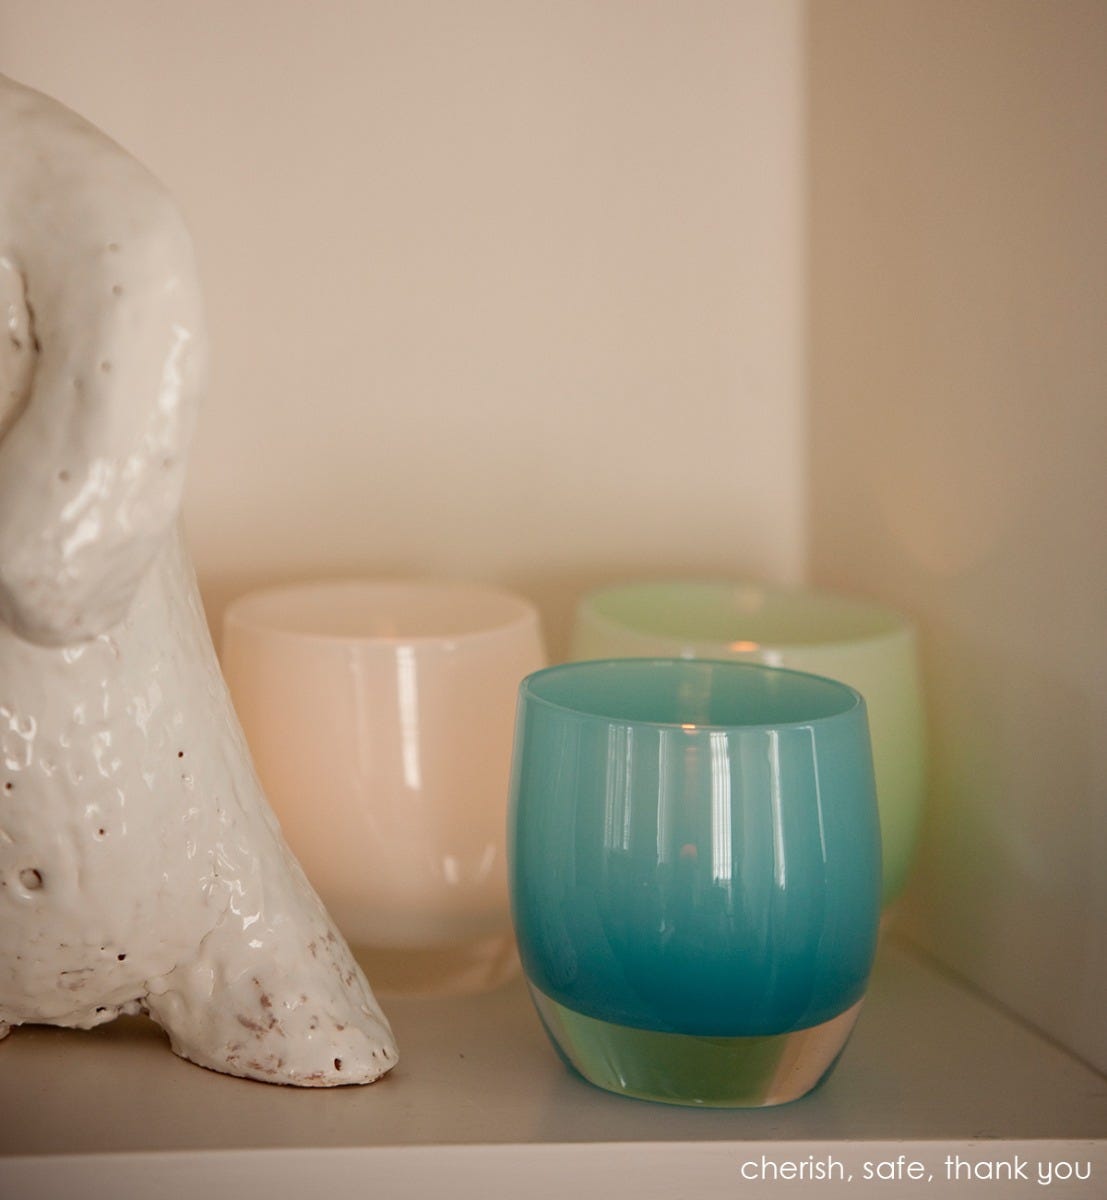 safe bright teal blue hand-blown glass votive candle holder. Paired with cherish and thank you.